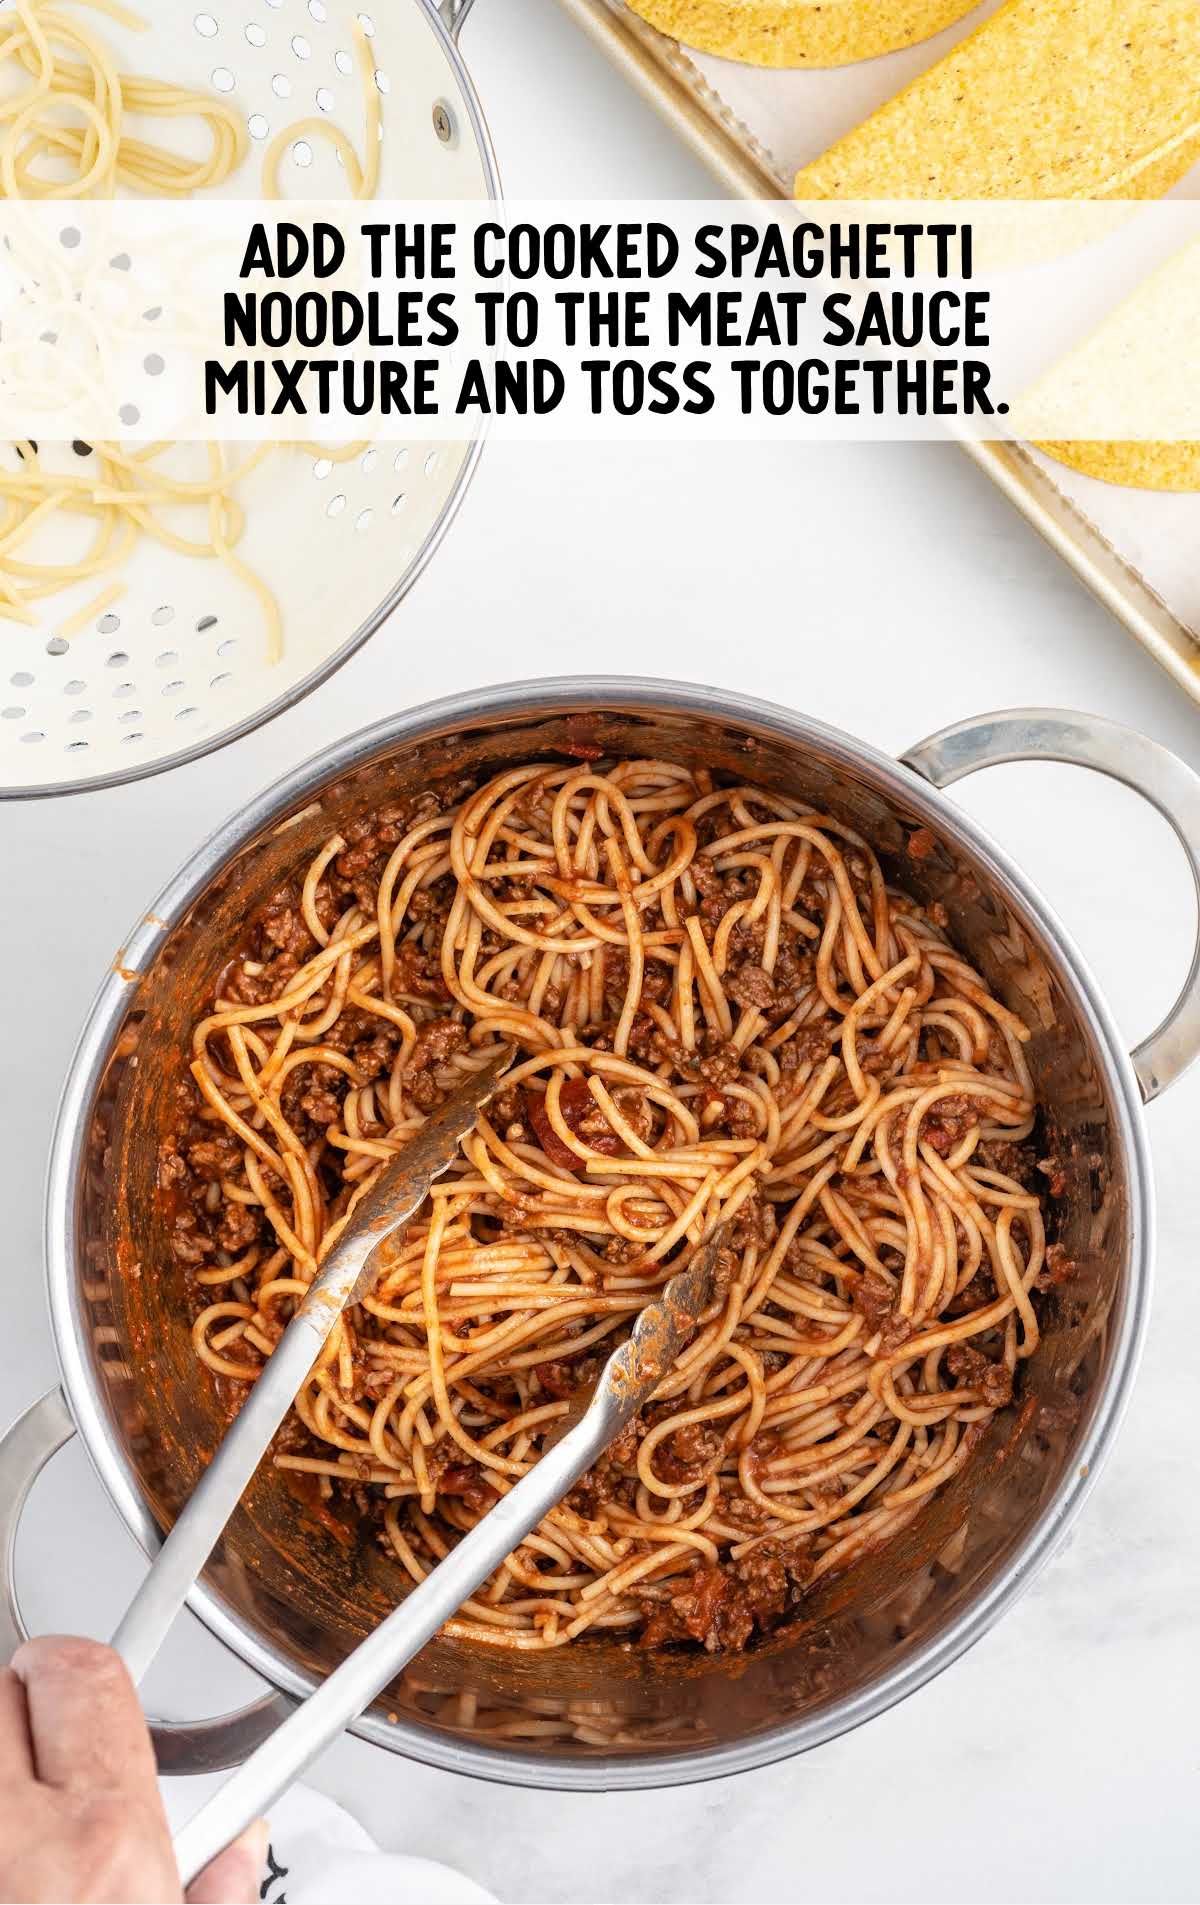 spaghetti noodles added to the meat sauce mixture in a pot